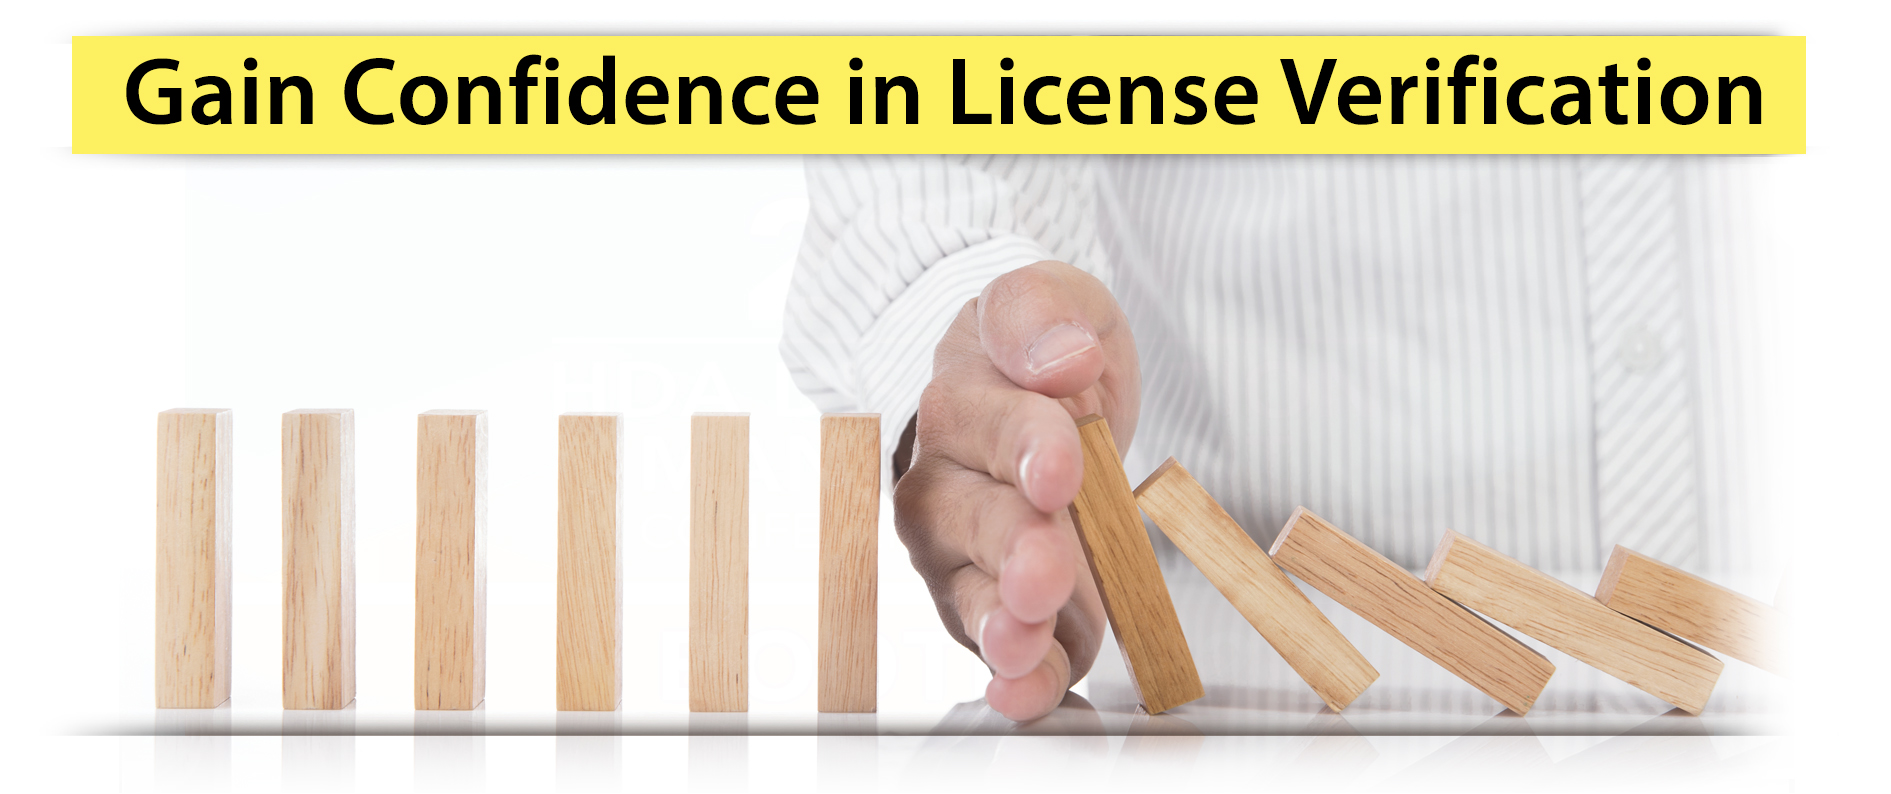 Gain Confidence in License Verification